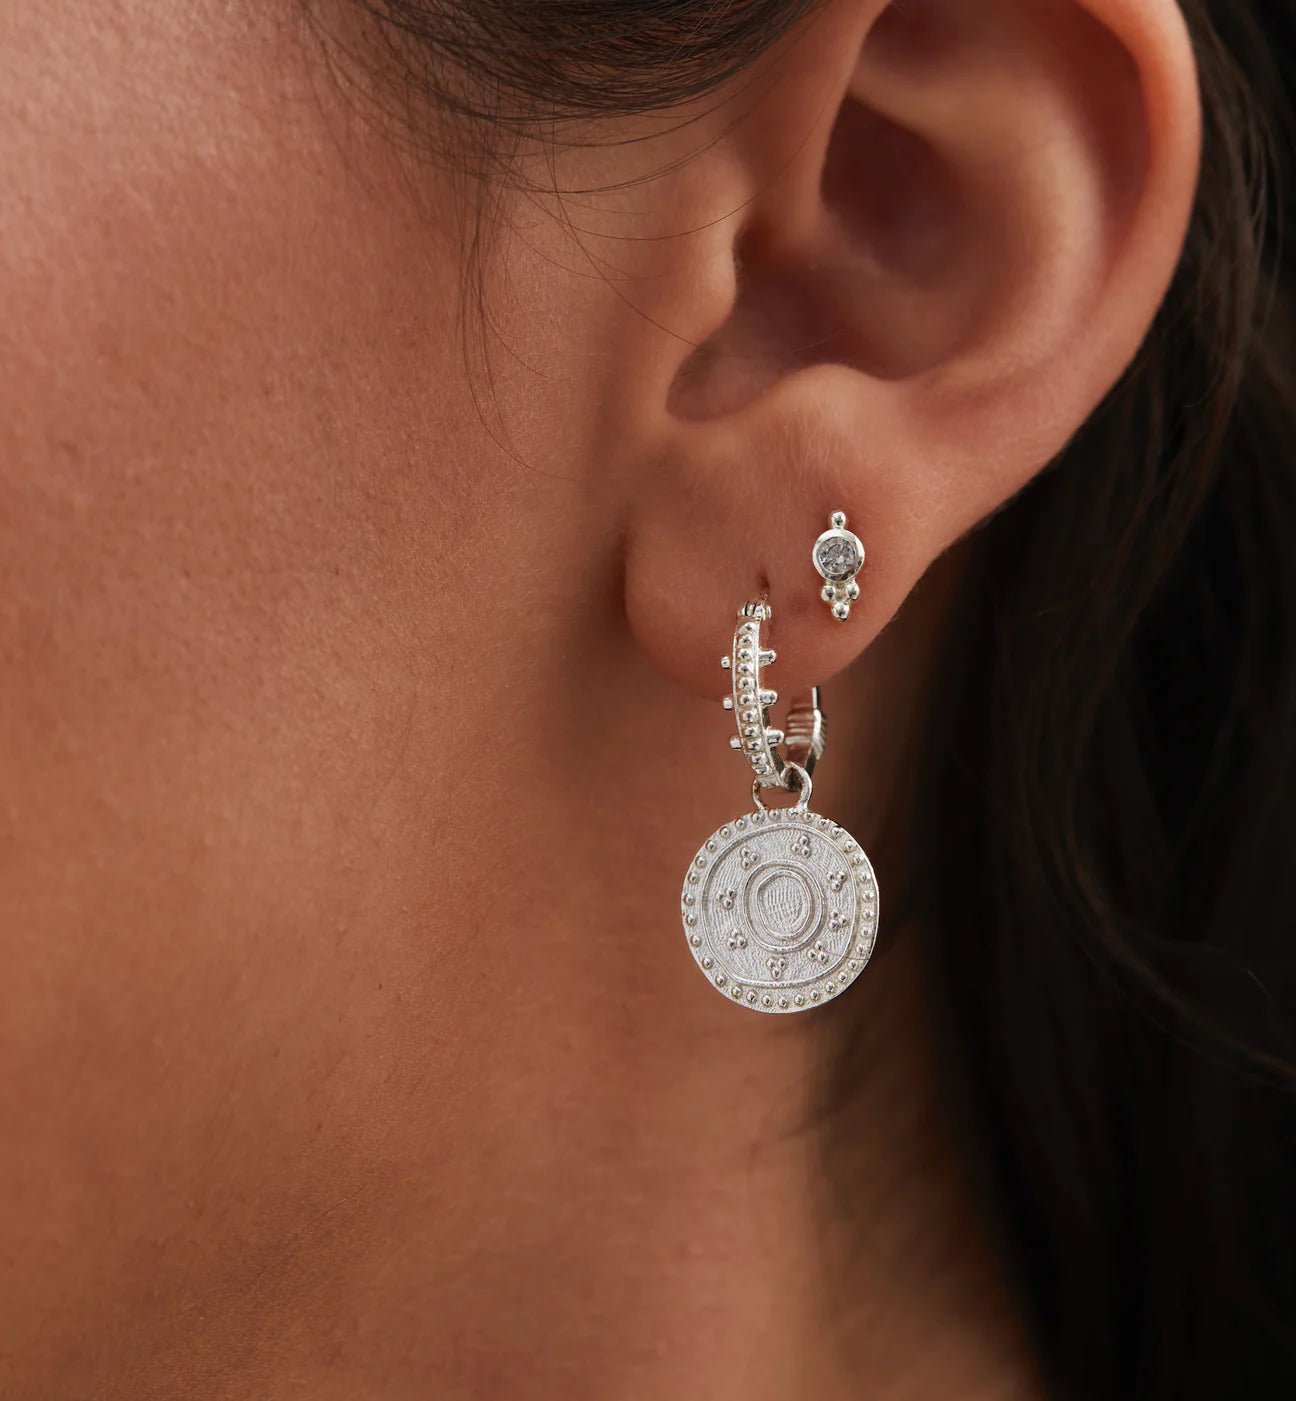 A woman's ear with an Anna + Nina Single Dot Stud - Silver coin and a 925 sterling silver earring.